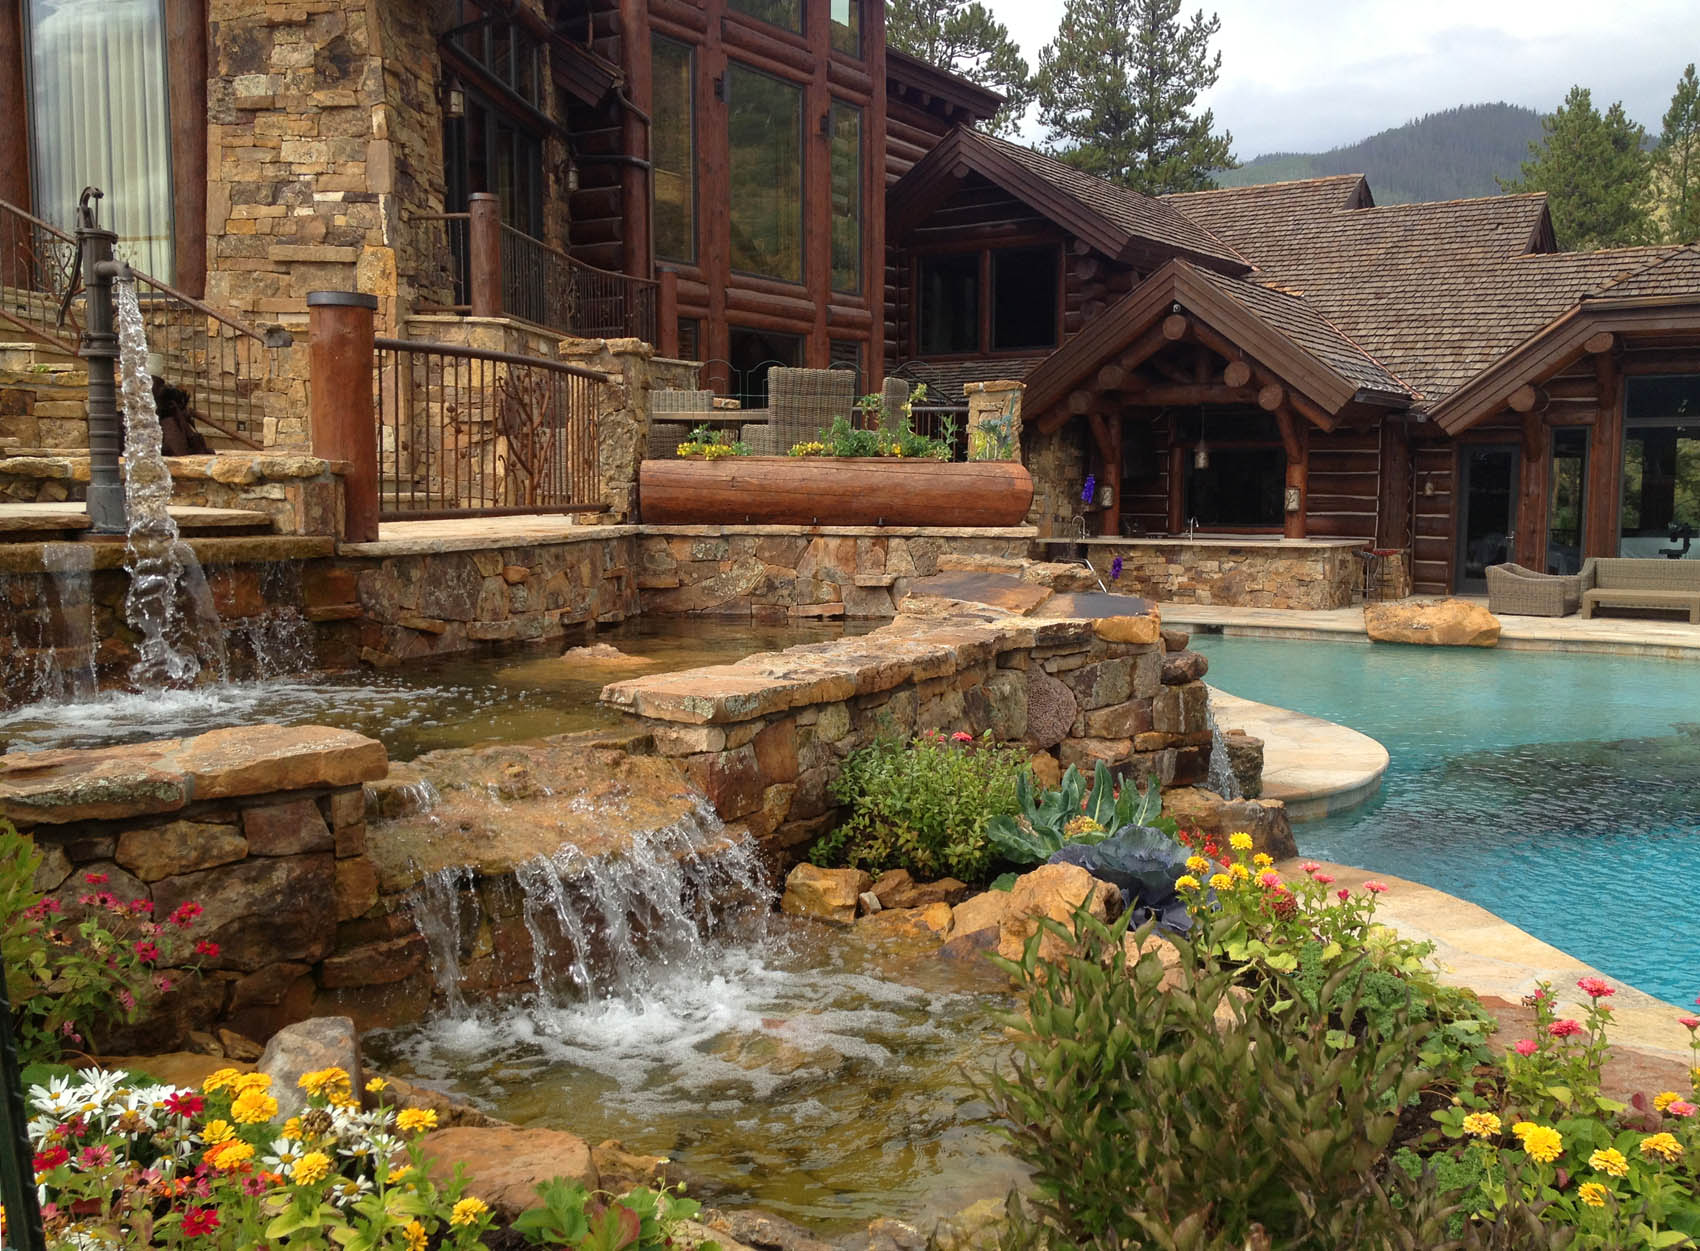 A luxurious backyard with a naturalistic swimming pool, stone waterfalls, colorful flowers, and a rustic wooden house with large windows and balconies.